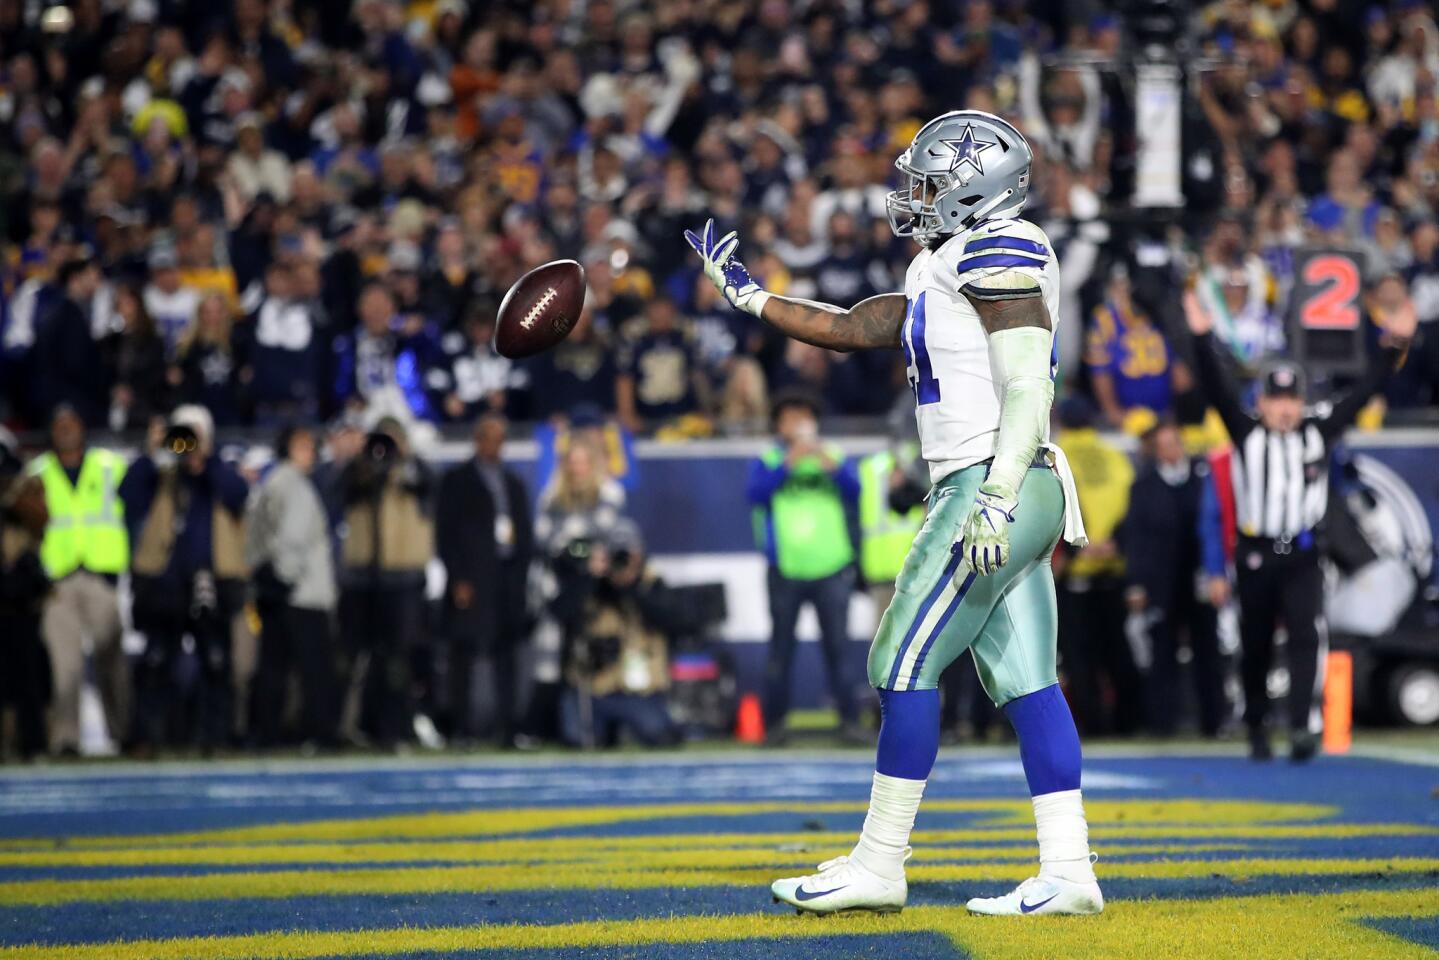 LOS ANGELES, CA - JANUARY 12: Ezekiel Elliott #21 of the Dallas Cowboys celebrates after scoring a 1 yard touchdown in the third quarter against the Los Angeles Rams in the NFC Divisional Playoff game at Los Angeles Memorial Coliseum on January 12, 2019 in Los Angeles, California. (Photo by Sean M. Haffey/Getty Images) ** OUTS - ELSENT, FPG, CM - OUTS * NM, PH, VA if sourced by CT, LA or MoD **